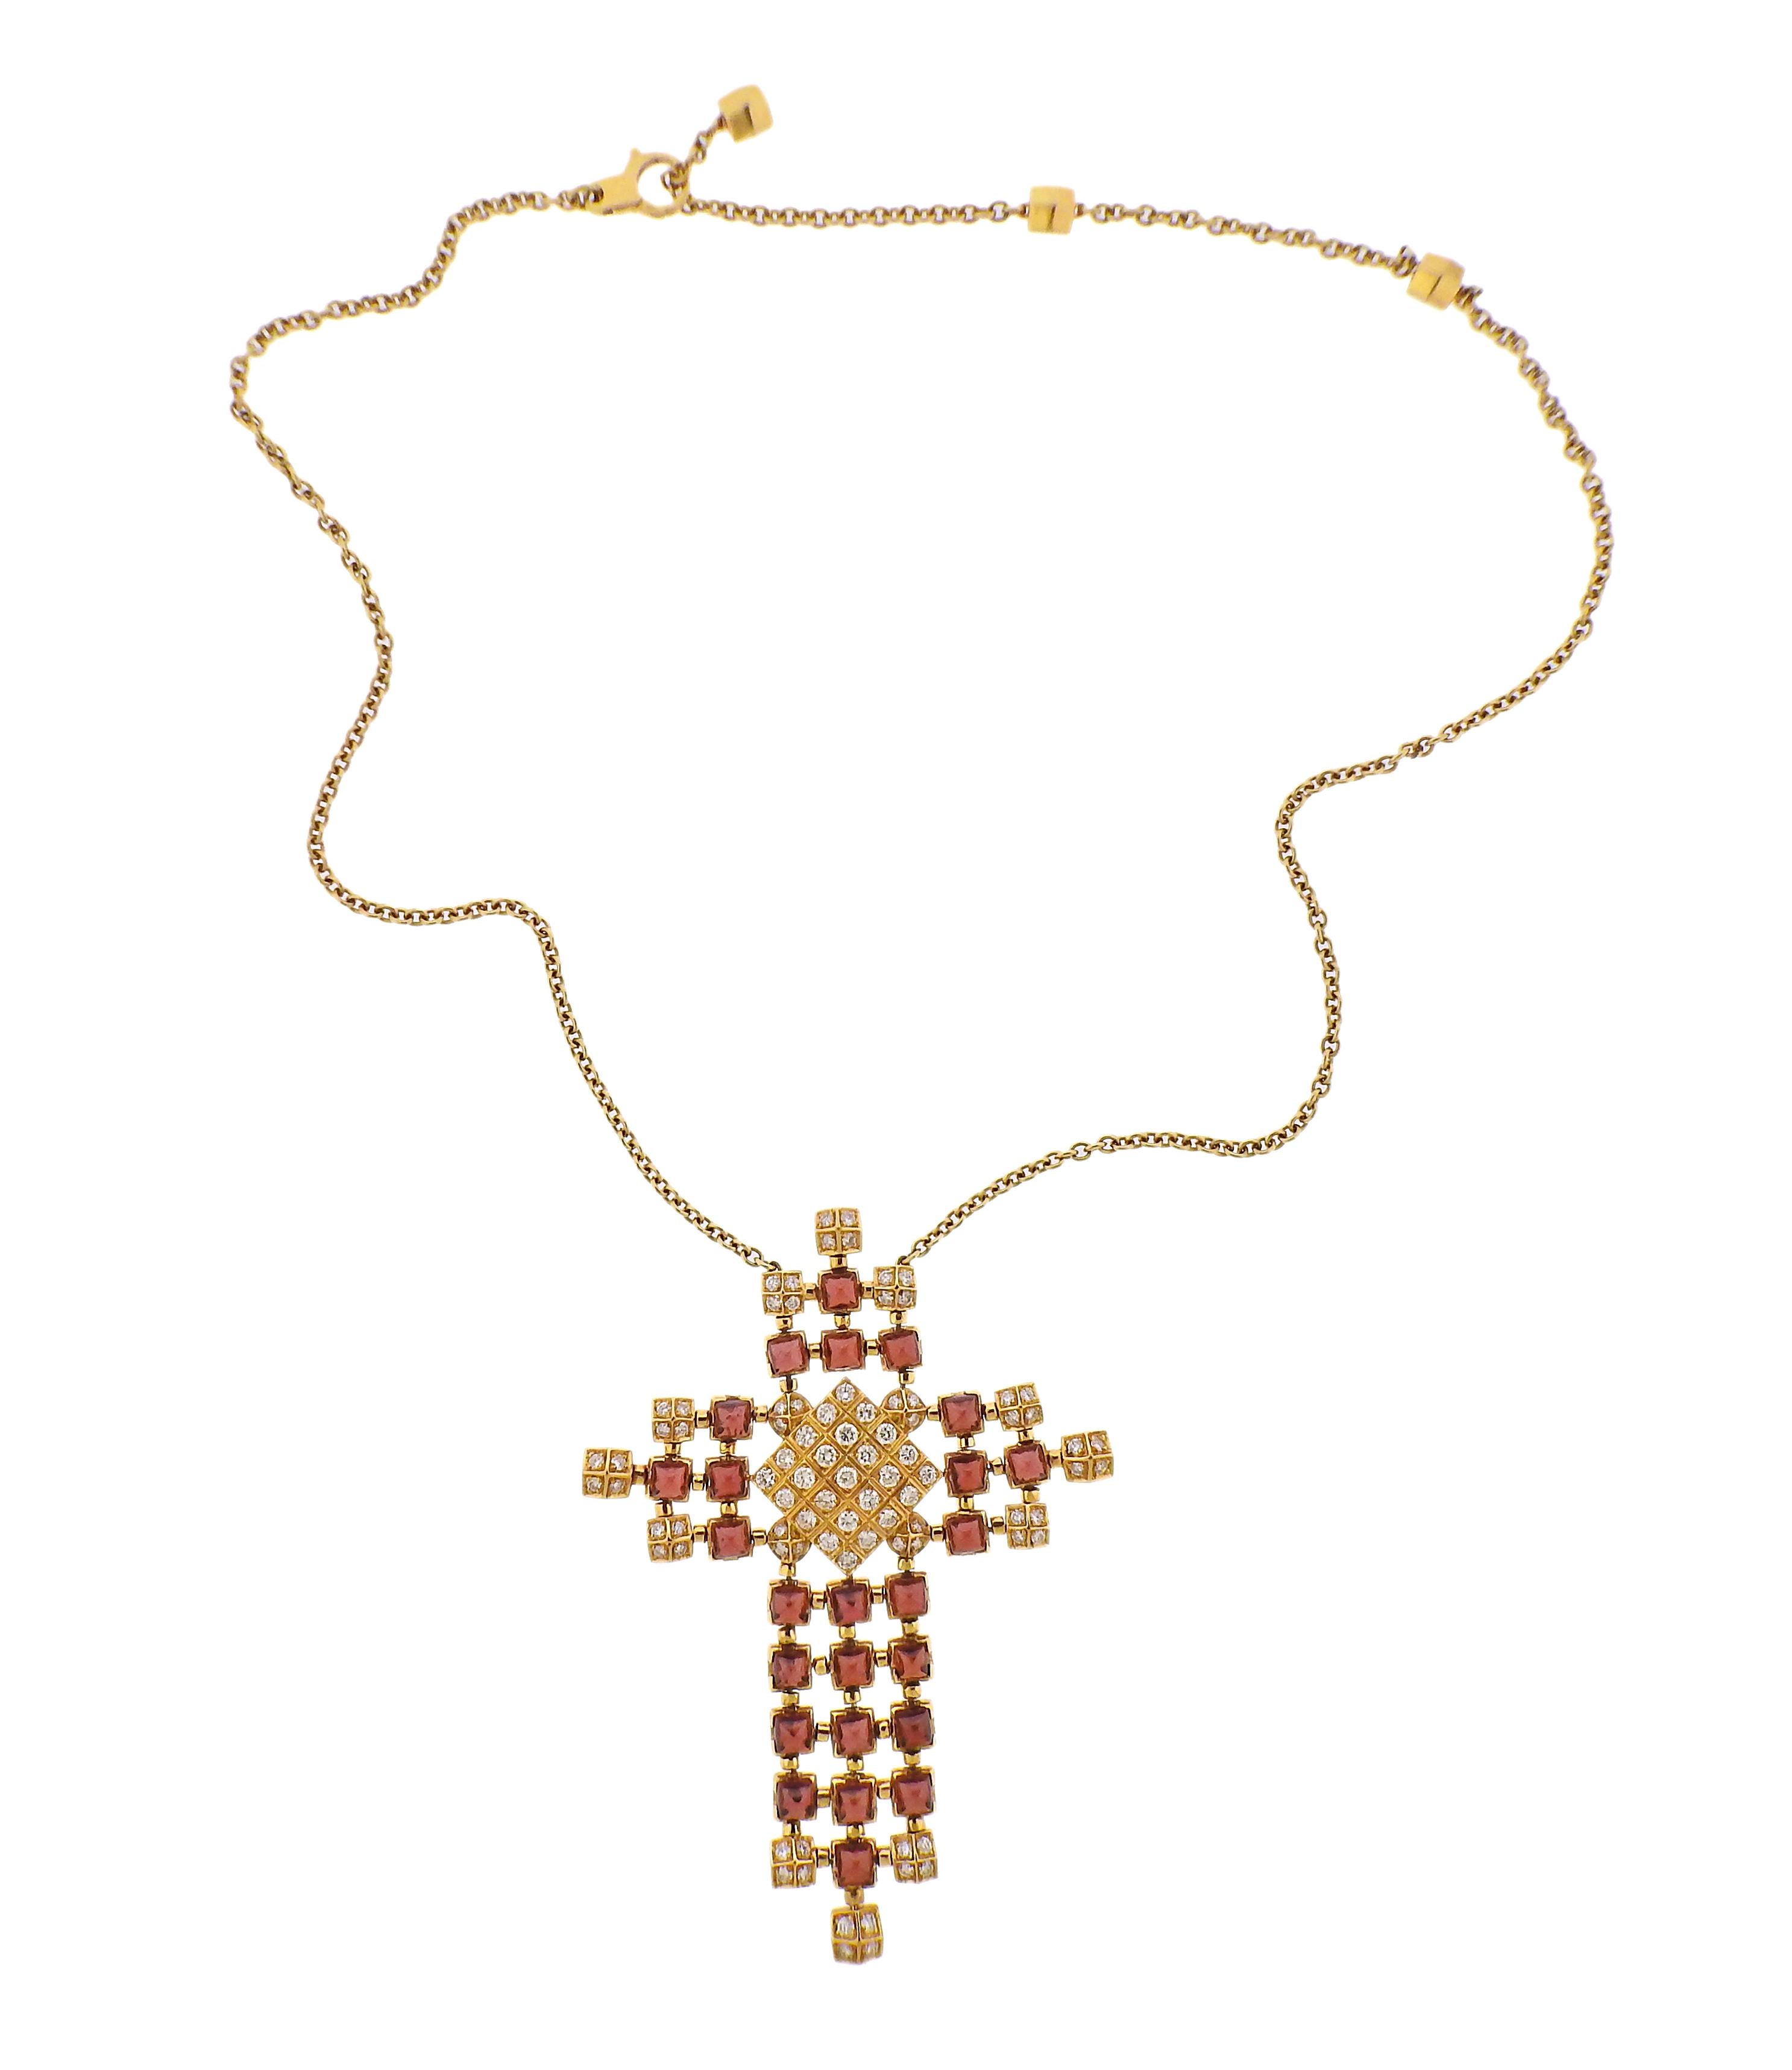 18k gold long chain necklace with large cross pendant, set with sugarloaf cut rhodolite and approx. 2.55ctw in diamonds. Necklace is 20